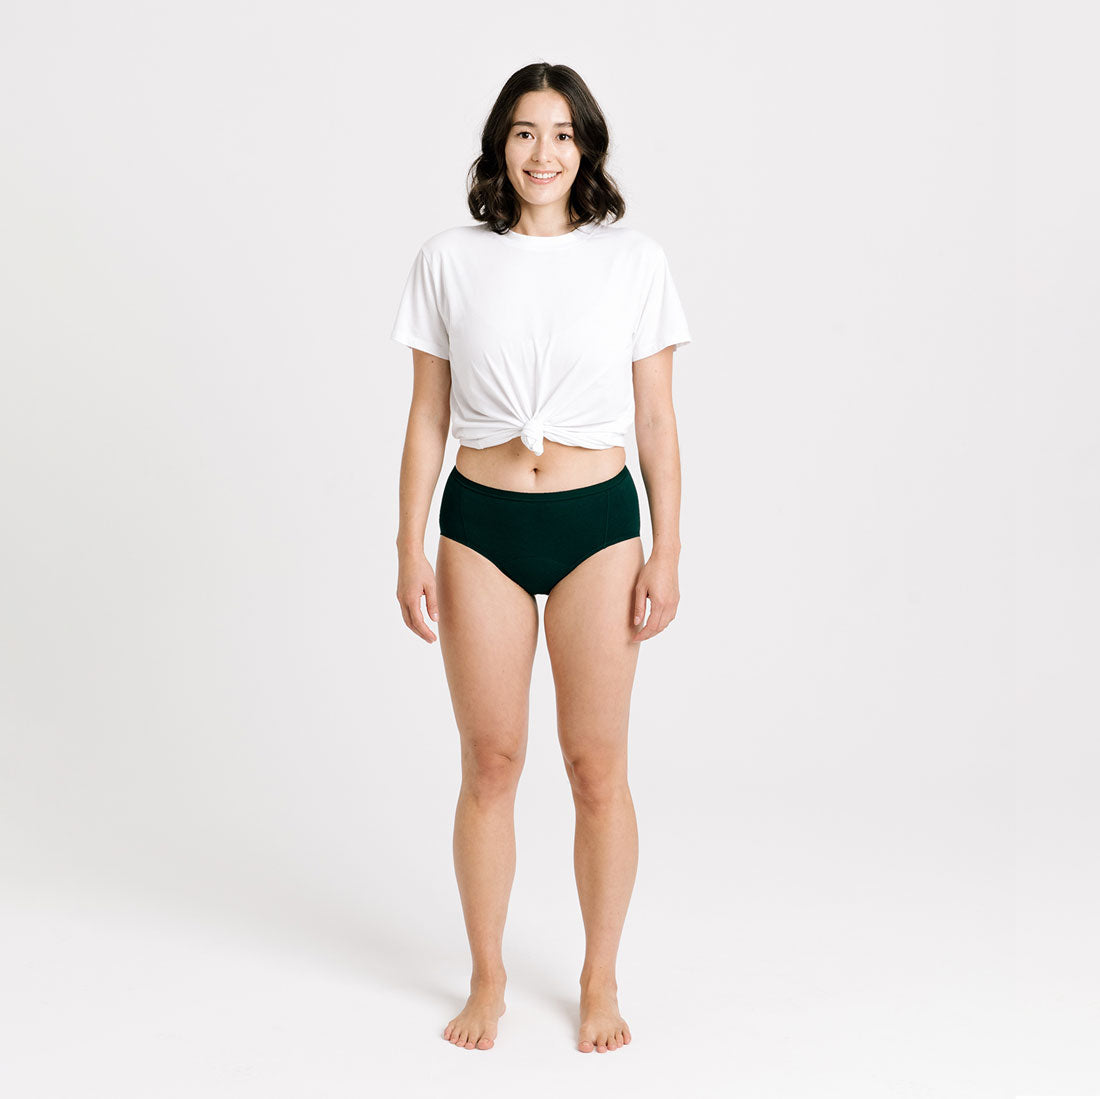 Aisle leakproof hipster front period underwear